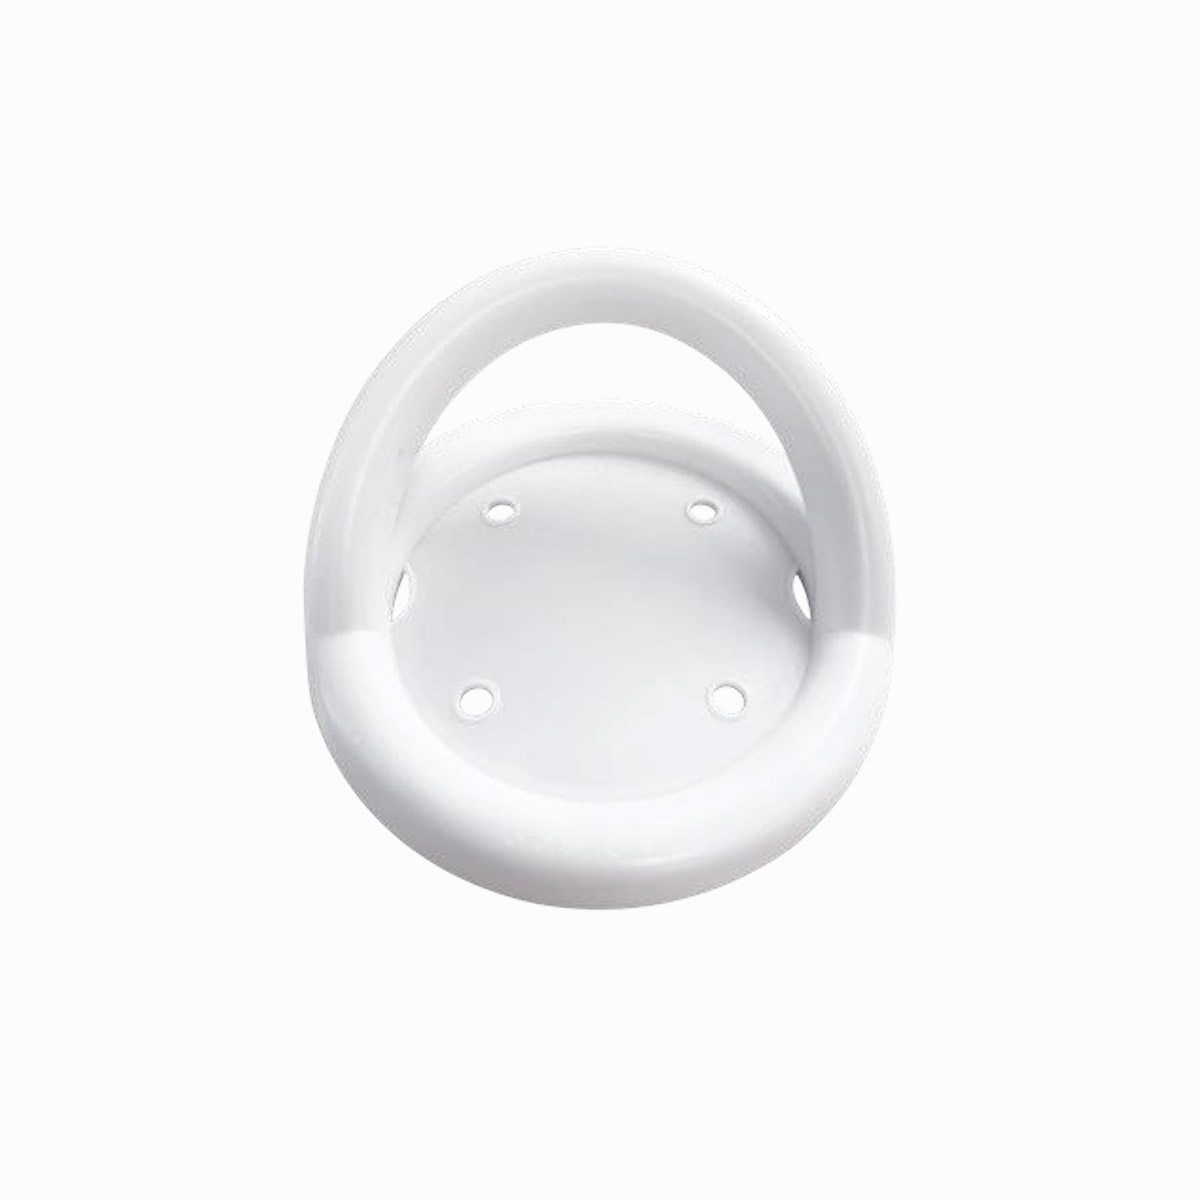 Silicon Vaginal Ring Pessary Set of 4 (2 Inch.2.25 Inch, 2.50 Inch, 2.75  Inch FS | eBay